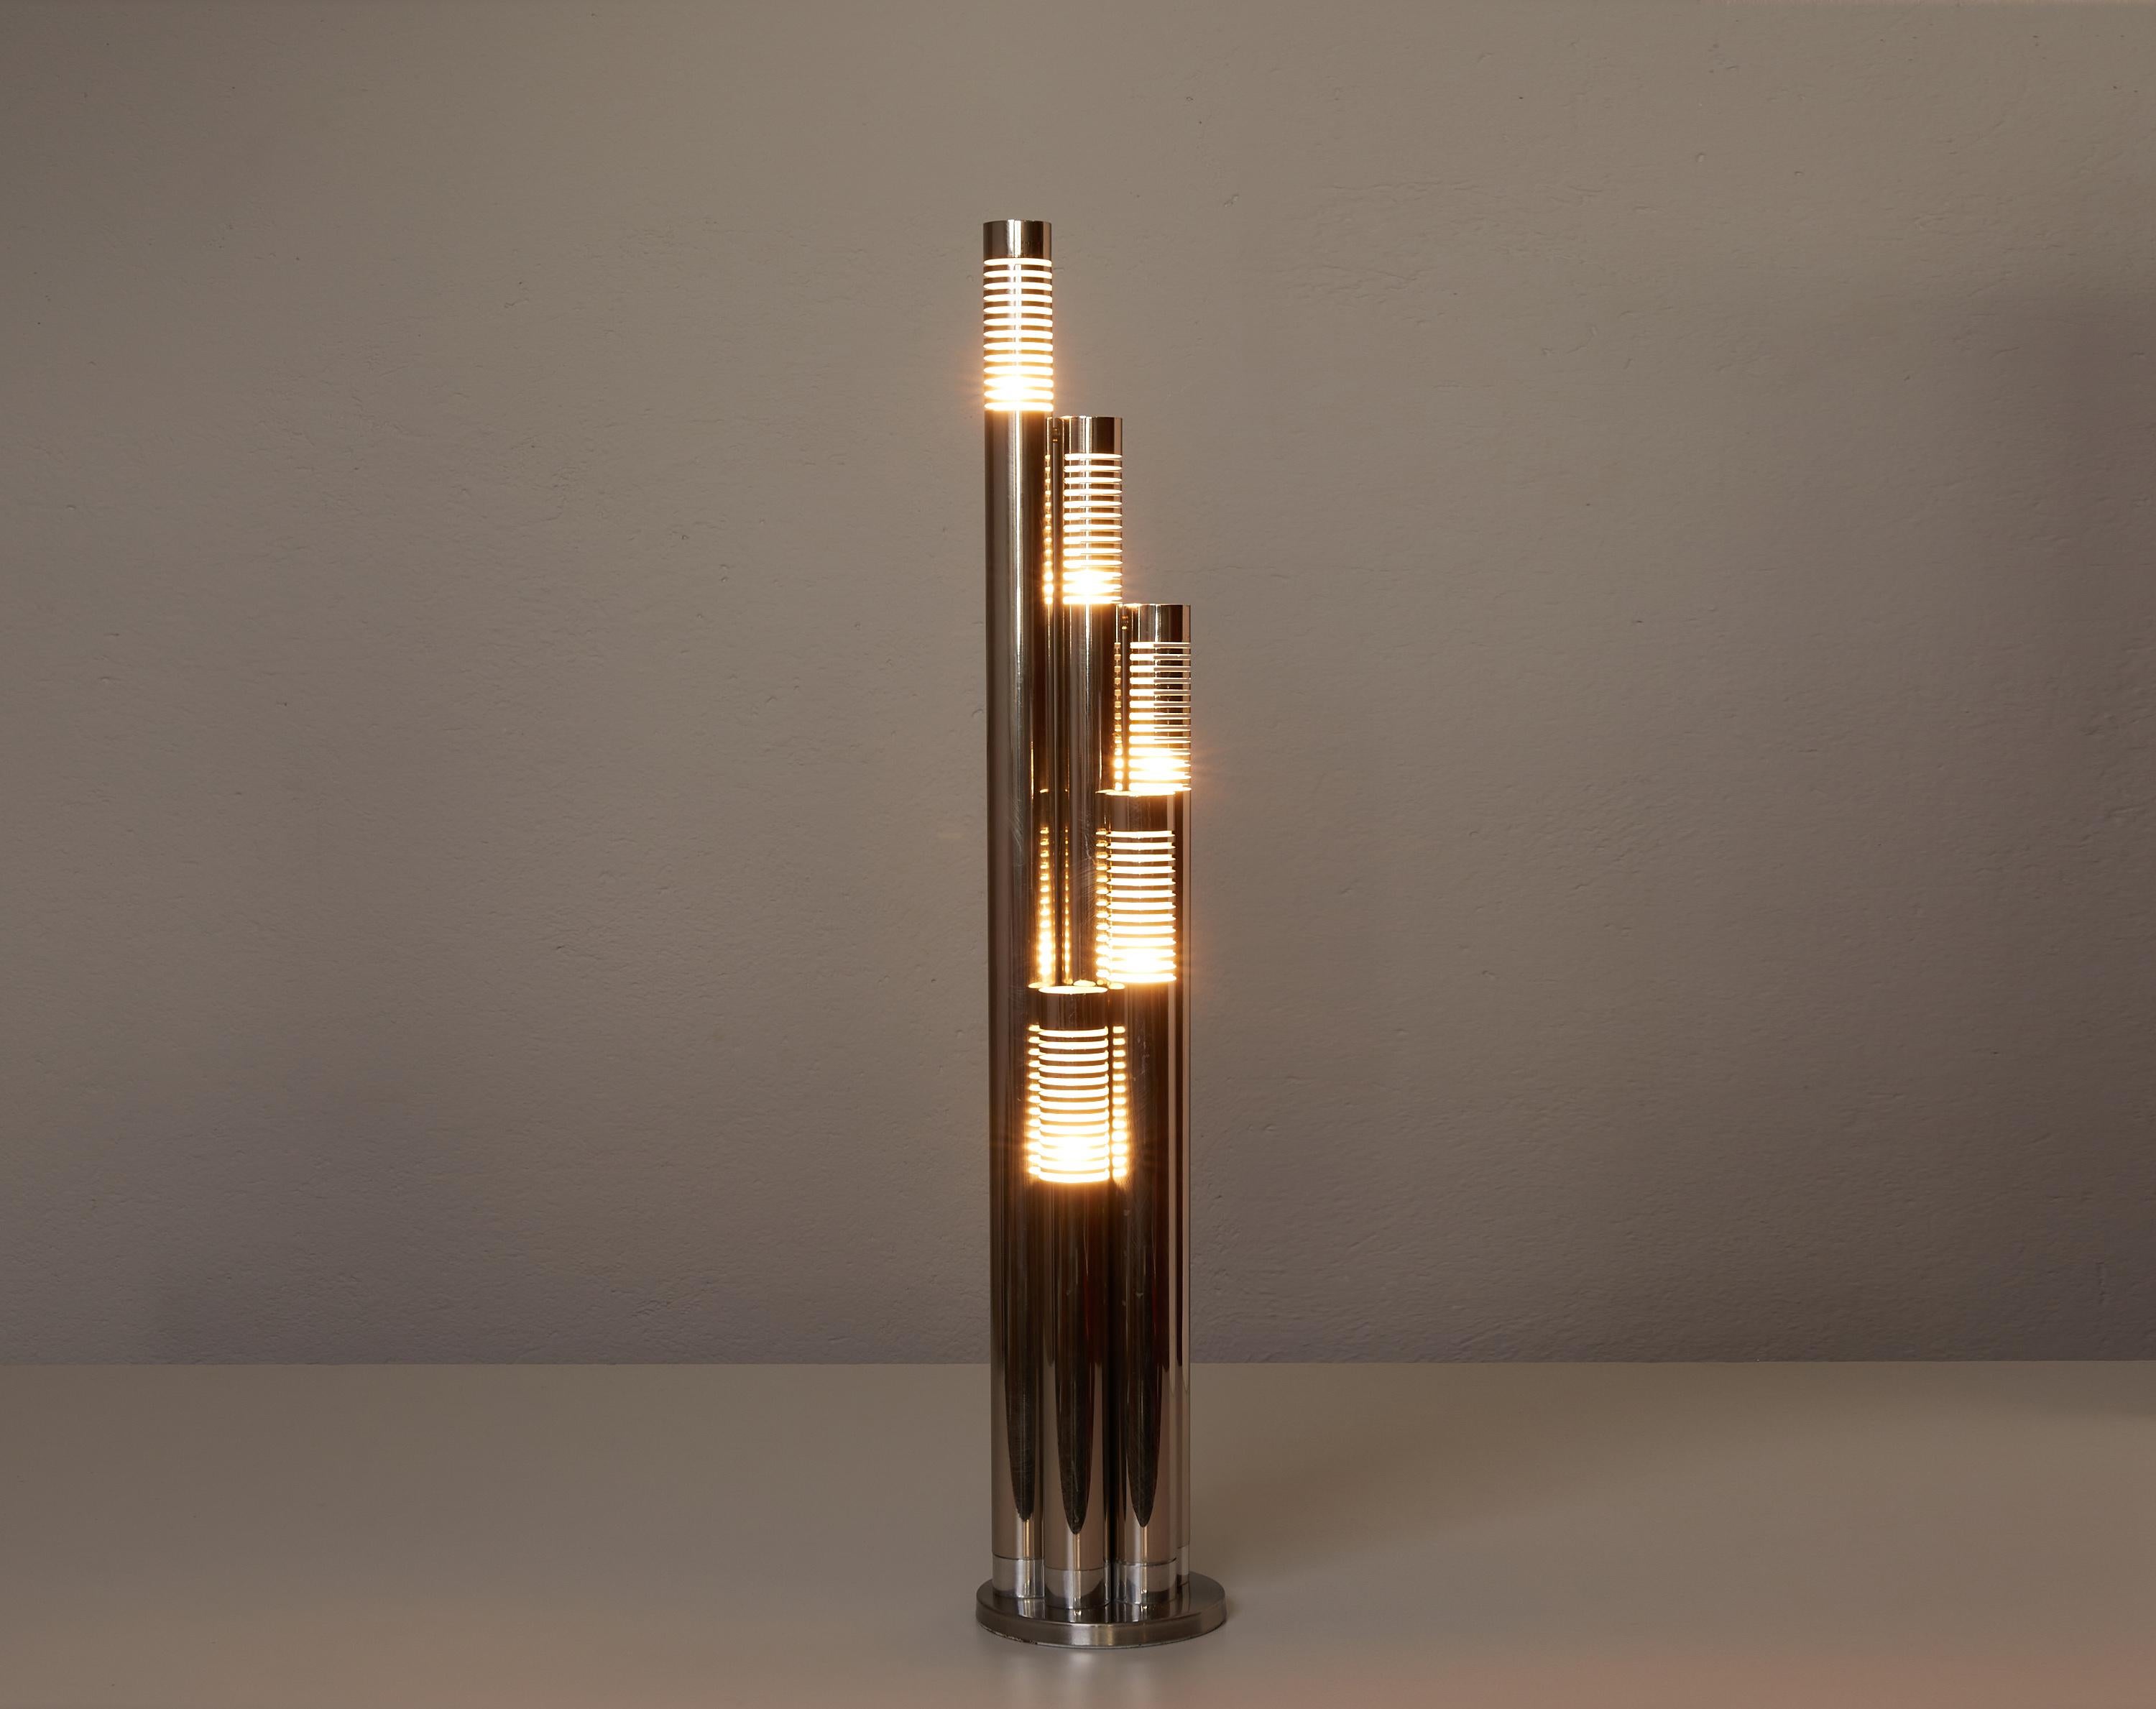 Italian chromed metal tubular table lamp, c. 1970.

Composed of a weighted circular metal base which holds five metal tubes of different heights.

One E14 light socket per tube. The light is diffused through the openings situated in top and